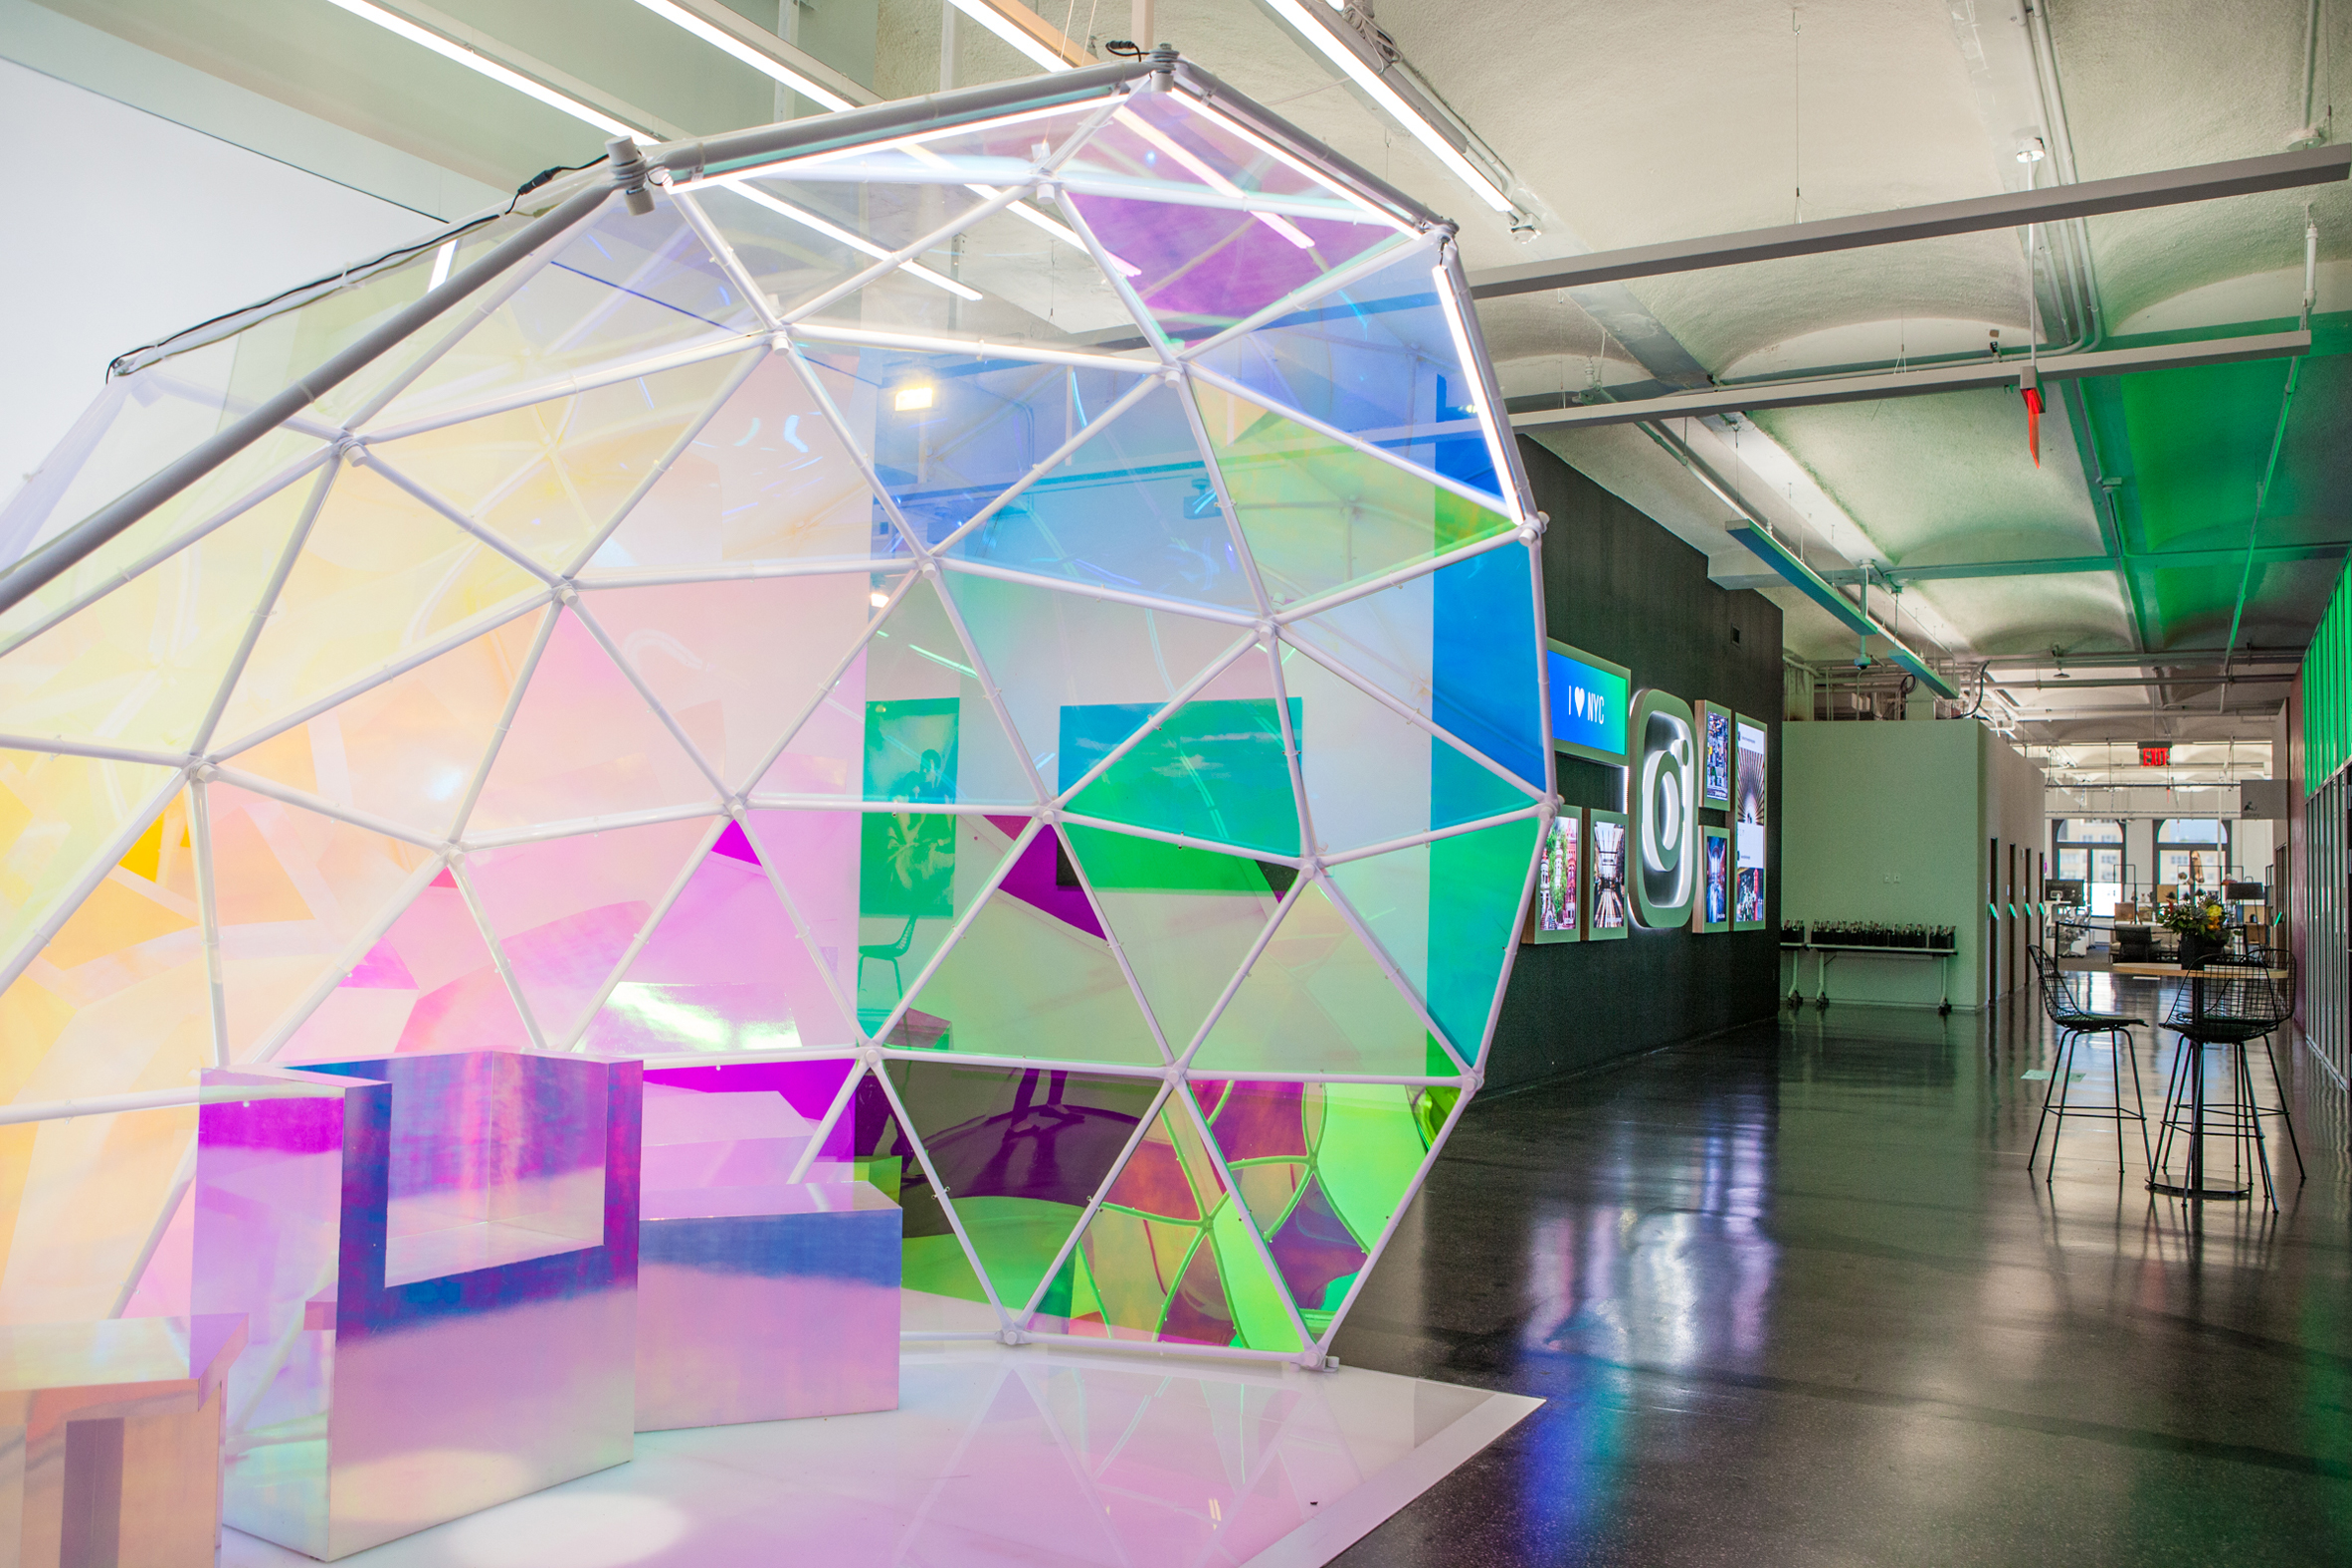 Instagram's new Manhattan office features a partial geodesic dome made of dichroic glass